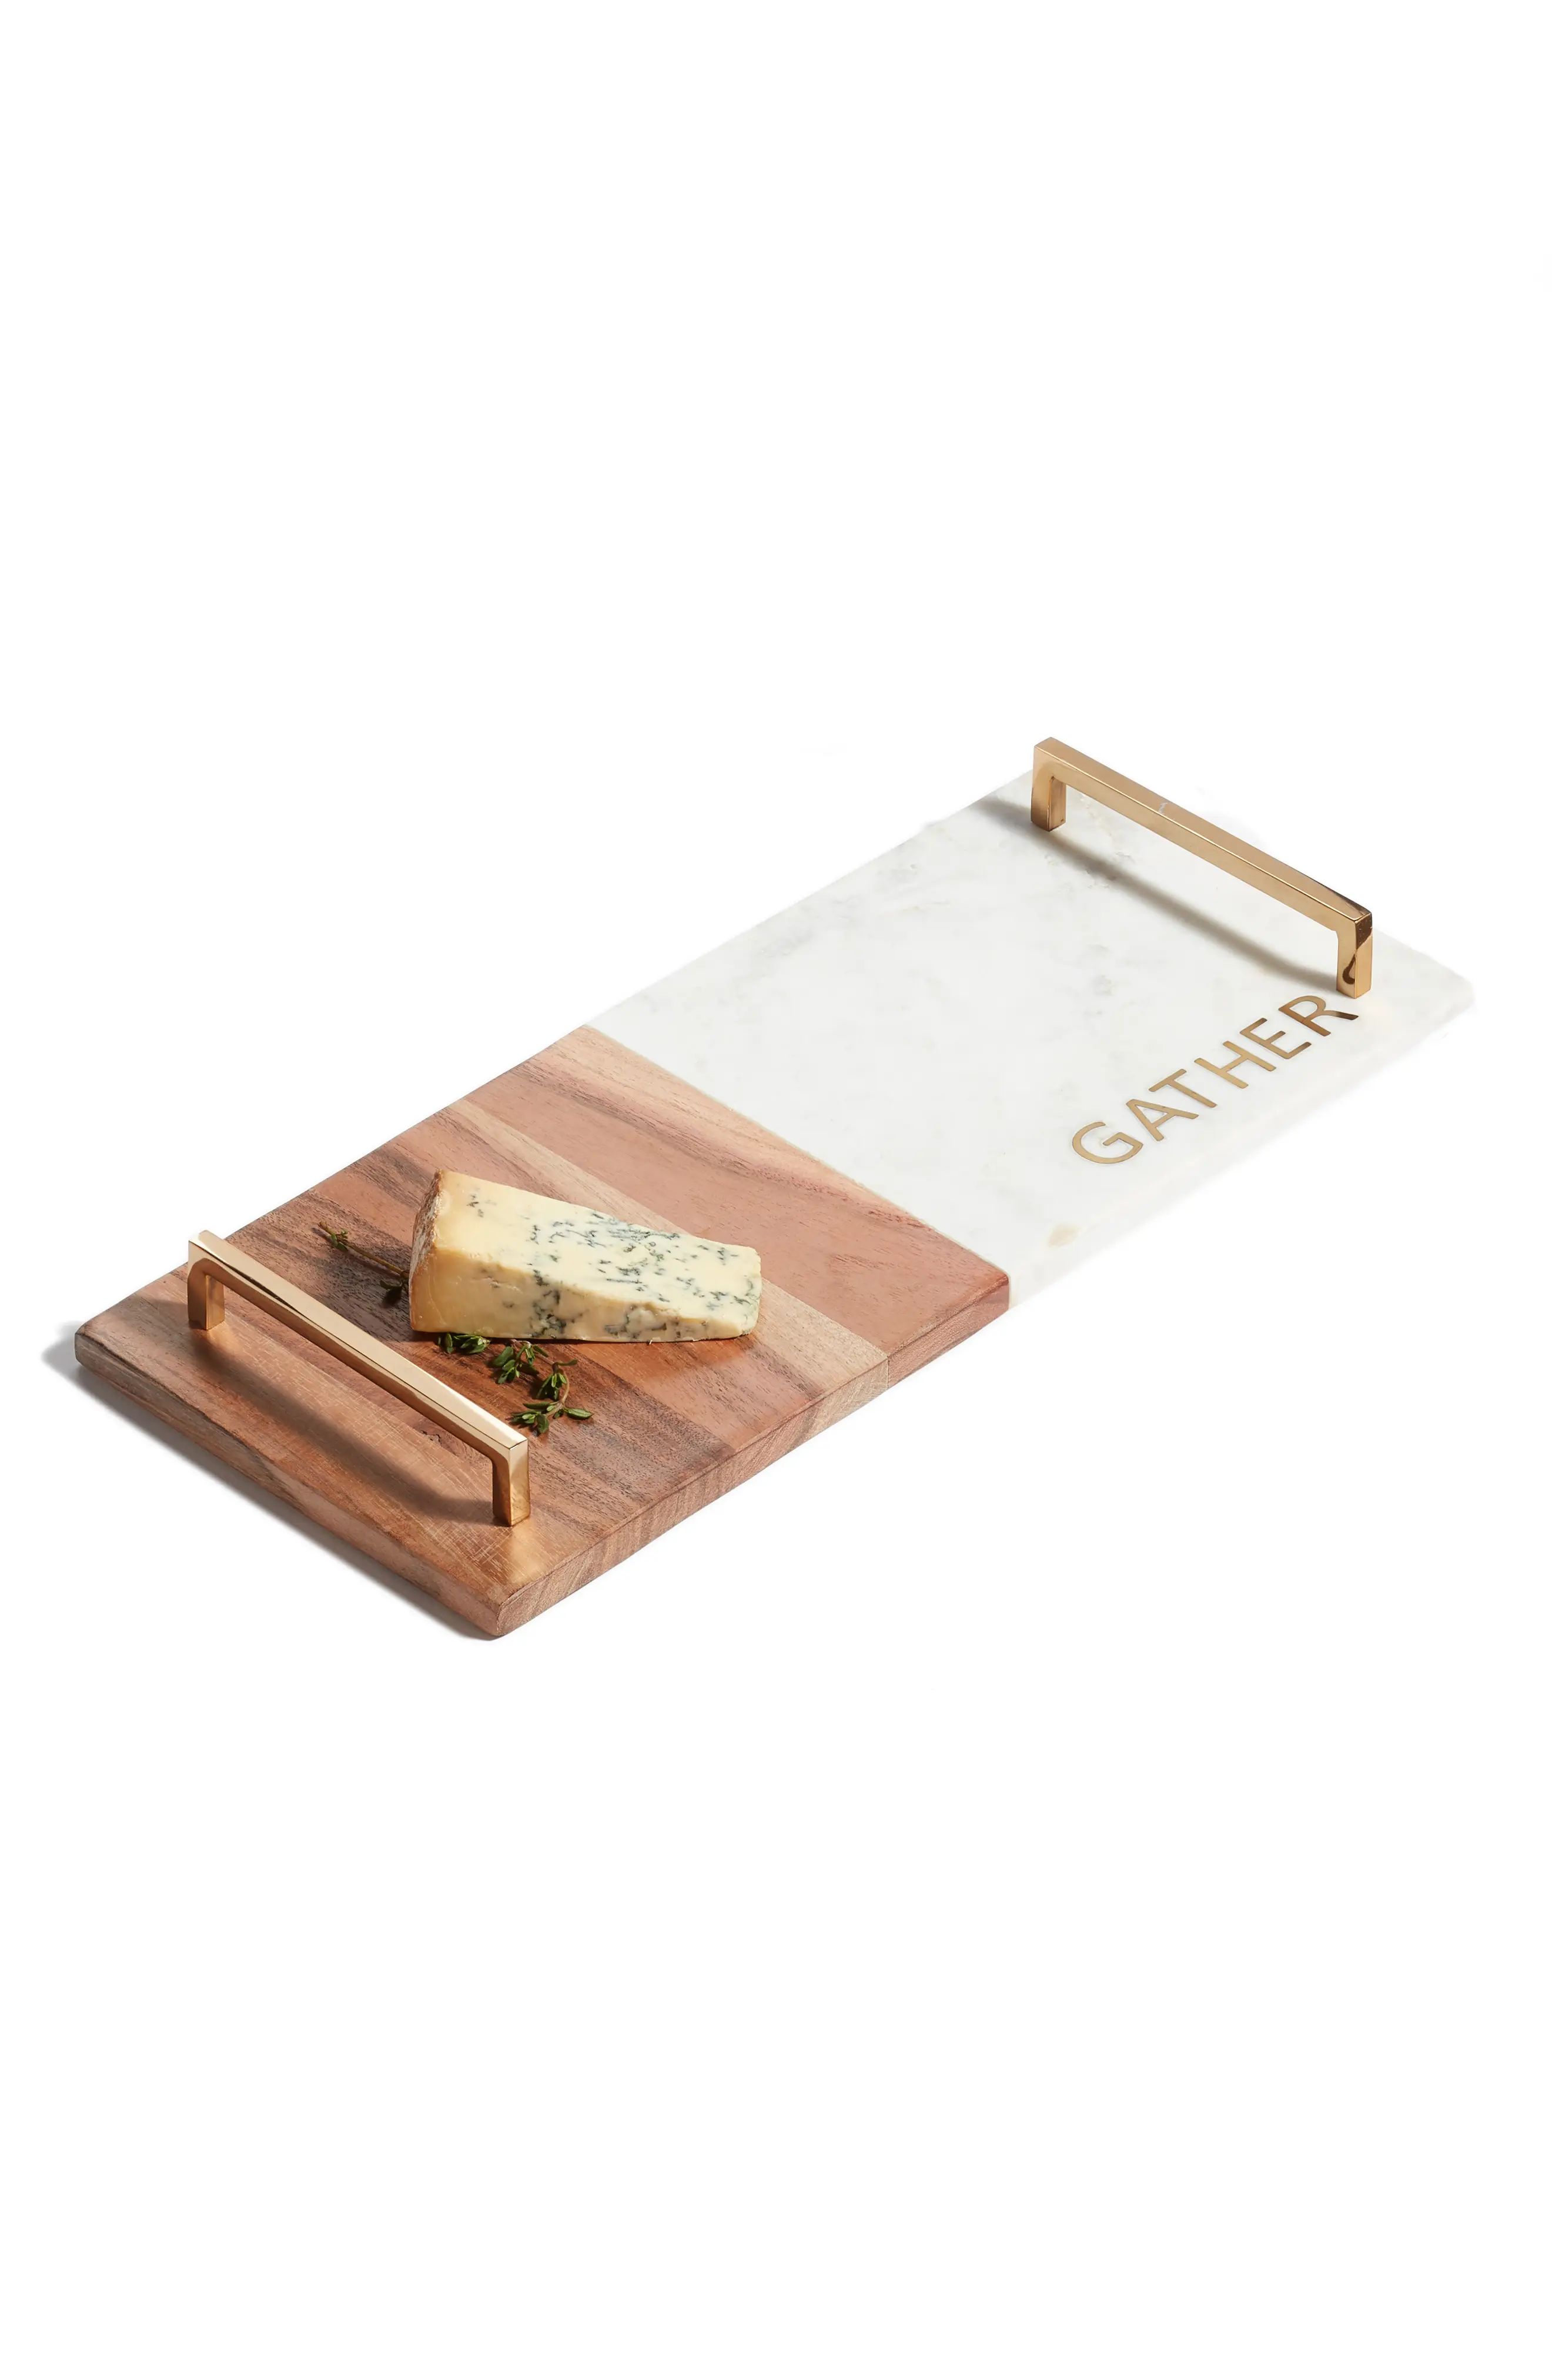 Nordstrom at Home Gather Wood & Marble Serving Tray | Nordstrom